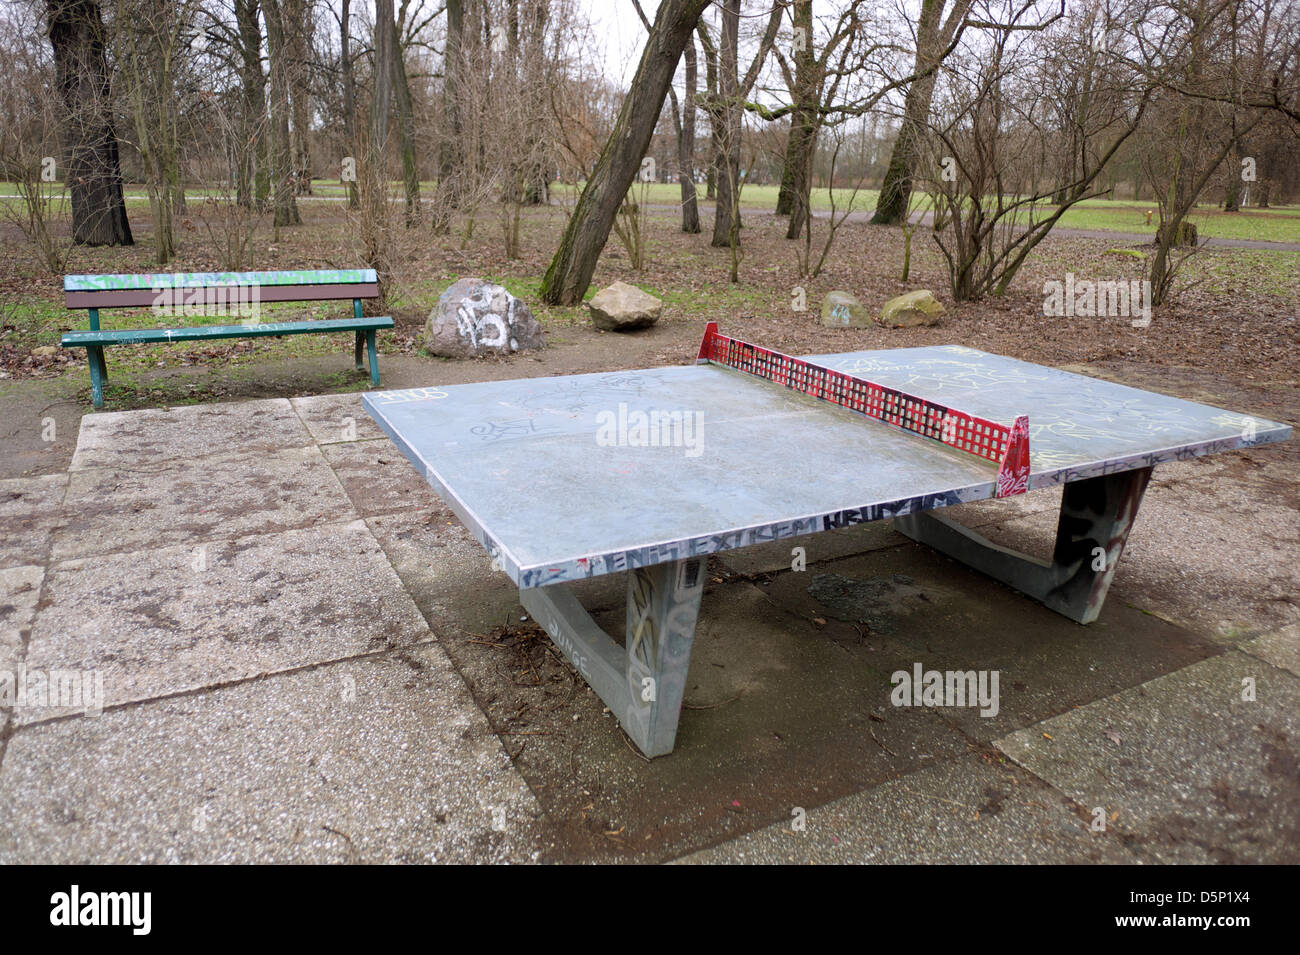 A Table Tennis Table Stands In A Park In Leipzig Germany 03 Stock Photo Alamy